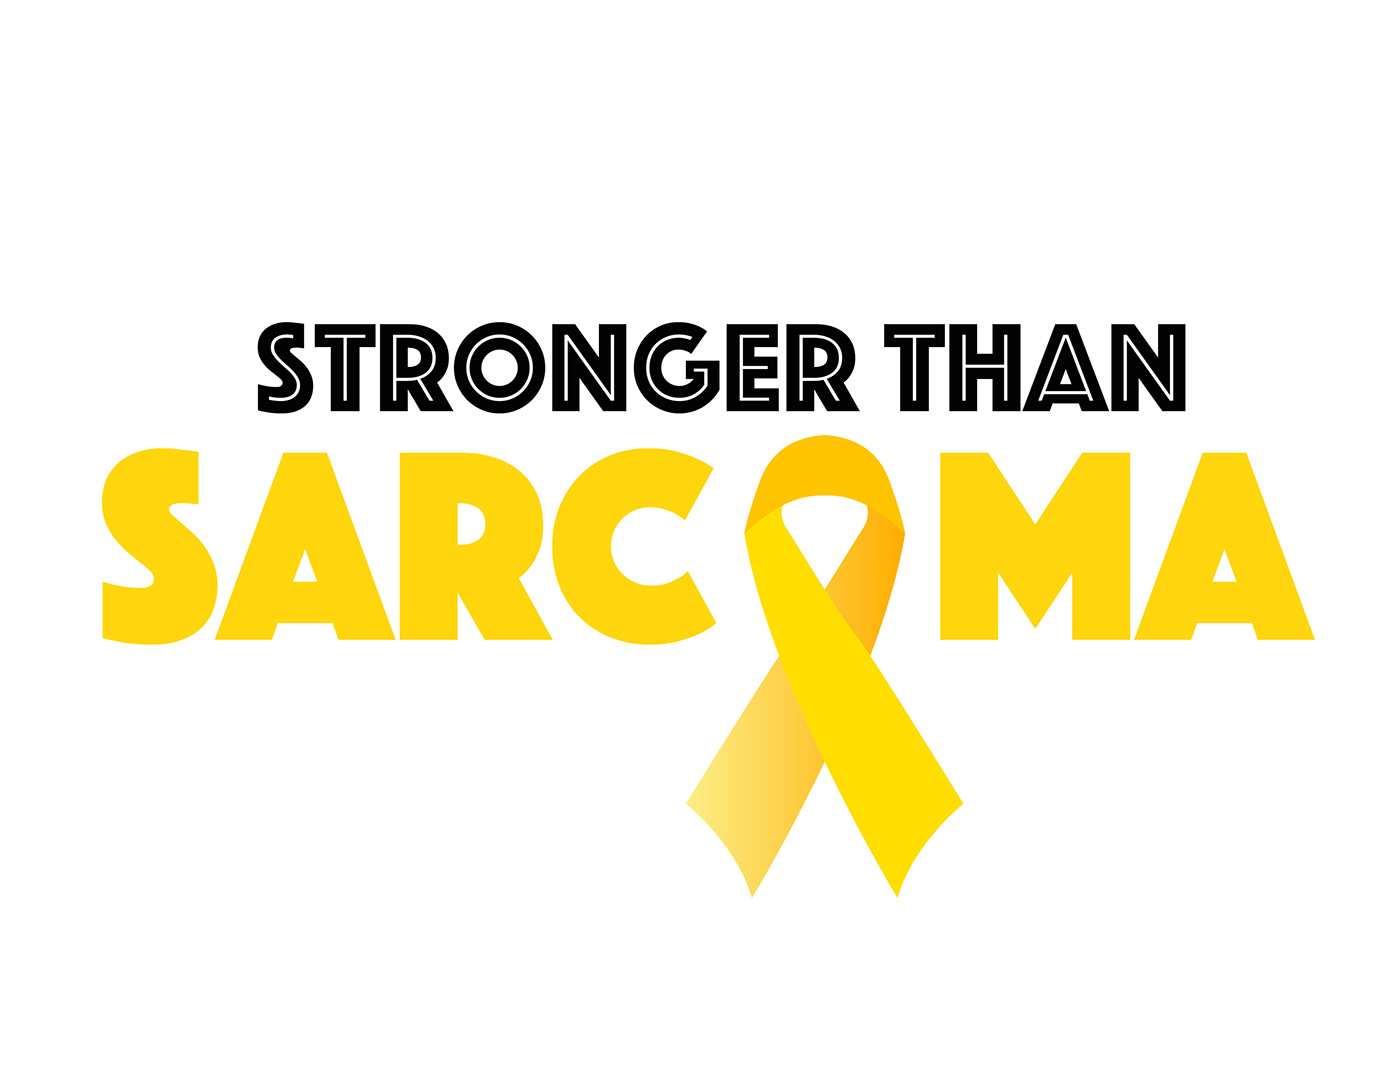 Sarcoma Fundraising Event graphics Event poster flyers designs cancer